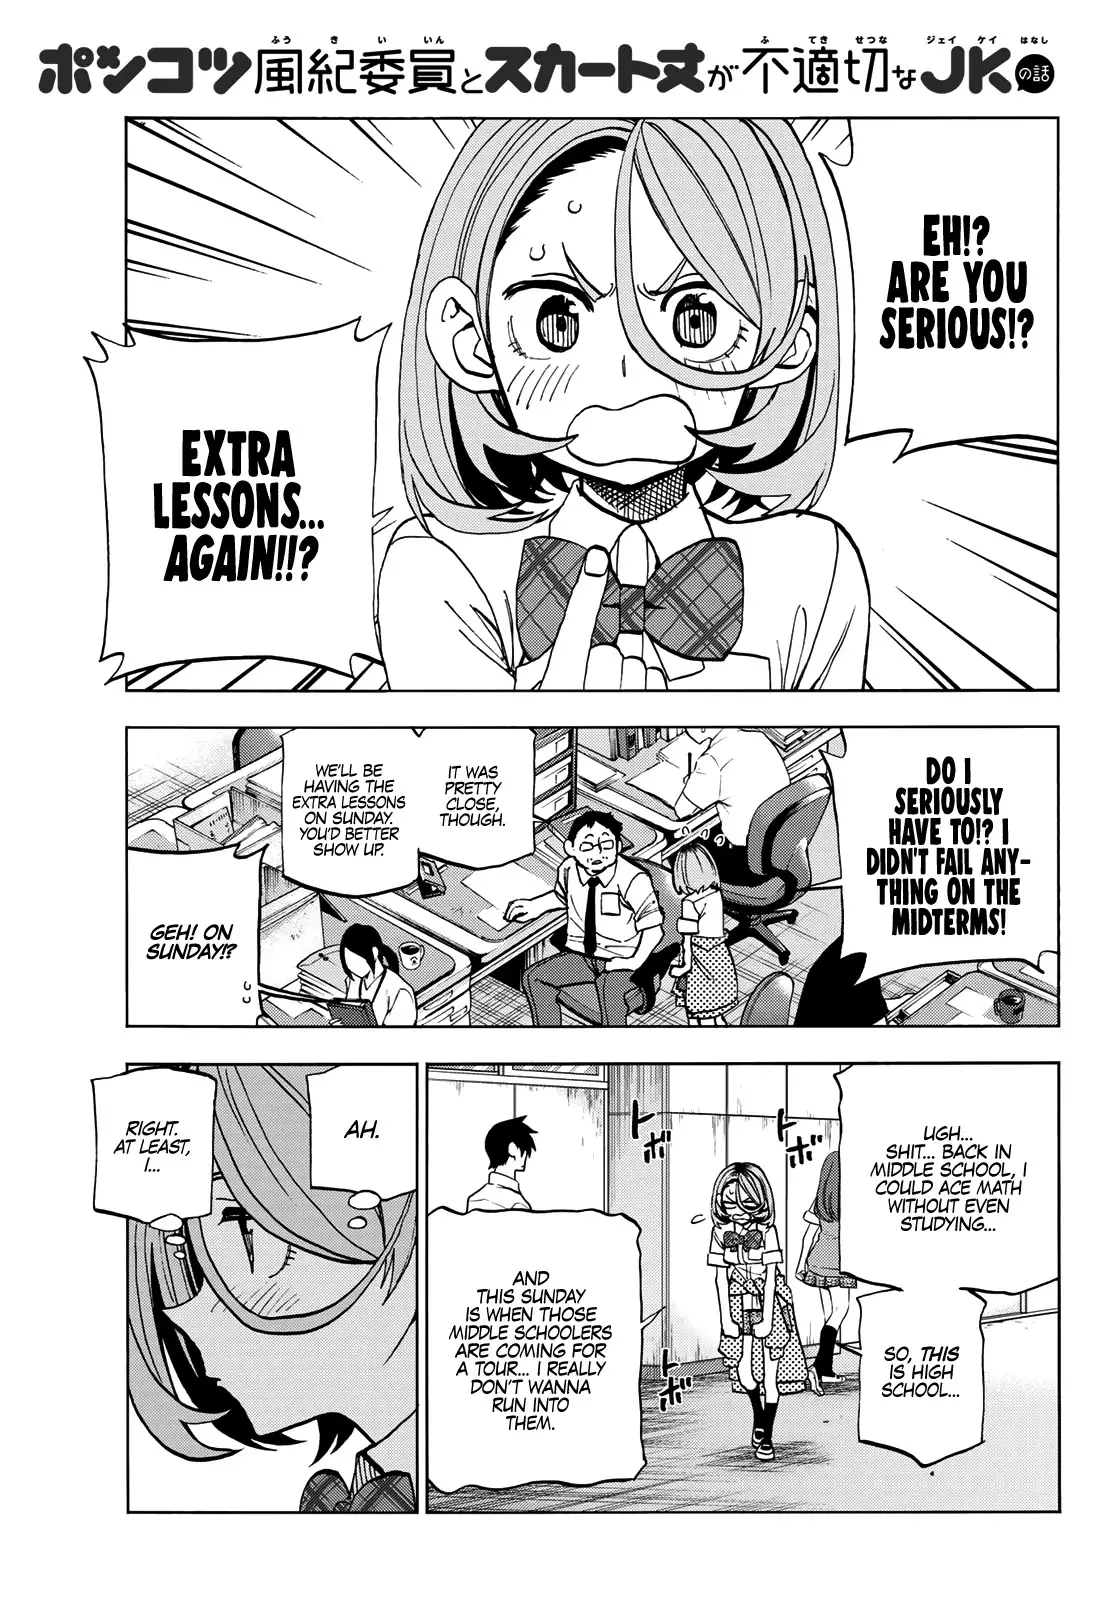 The Story Between A Dumb Prefect And A High School Girl With An Inappropriate Skirt Length - 12 page 2